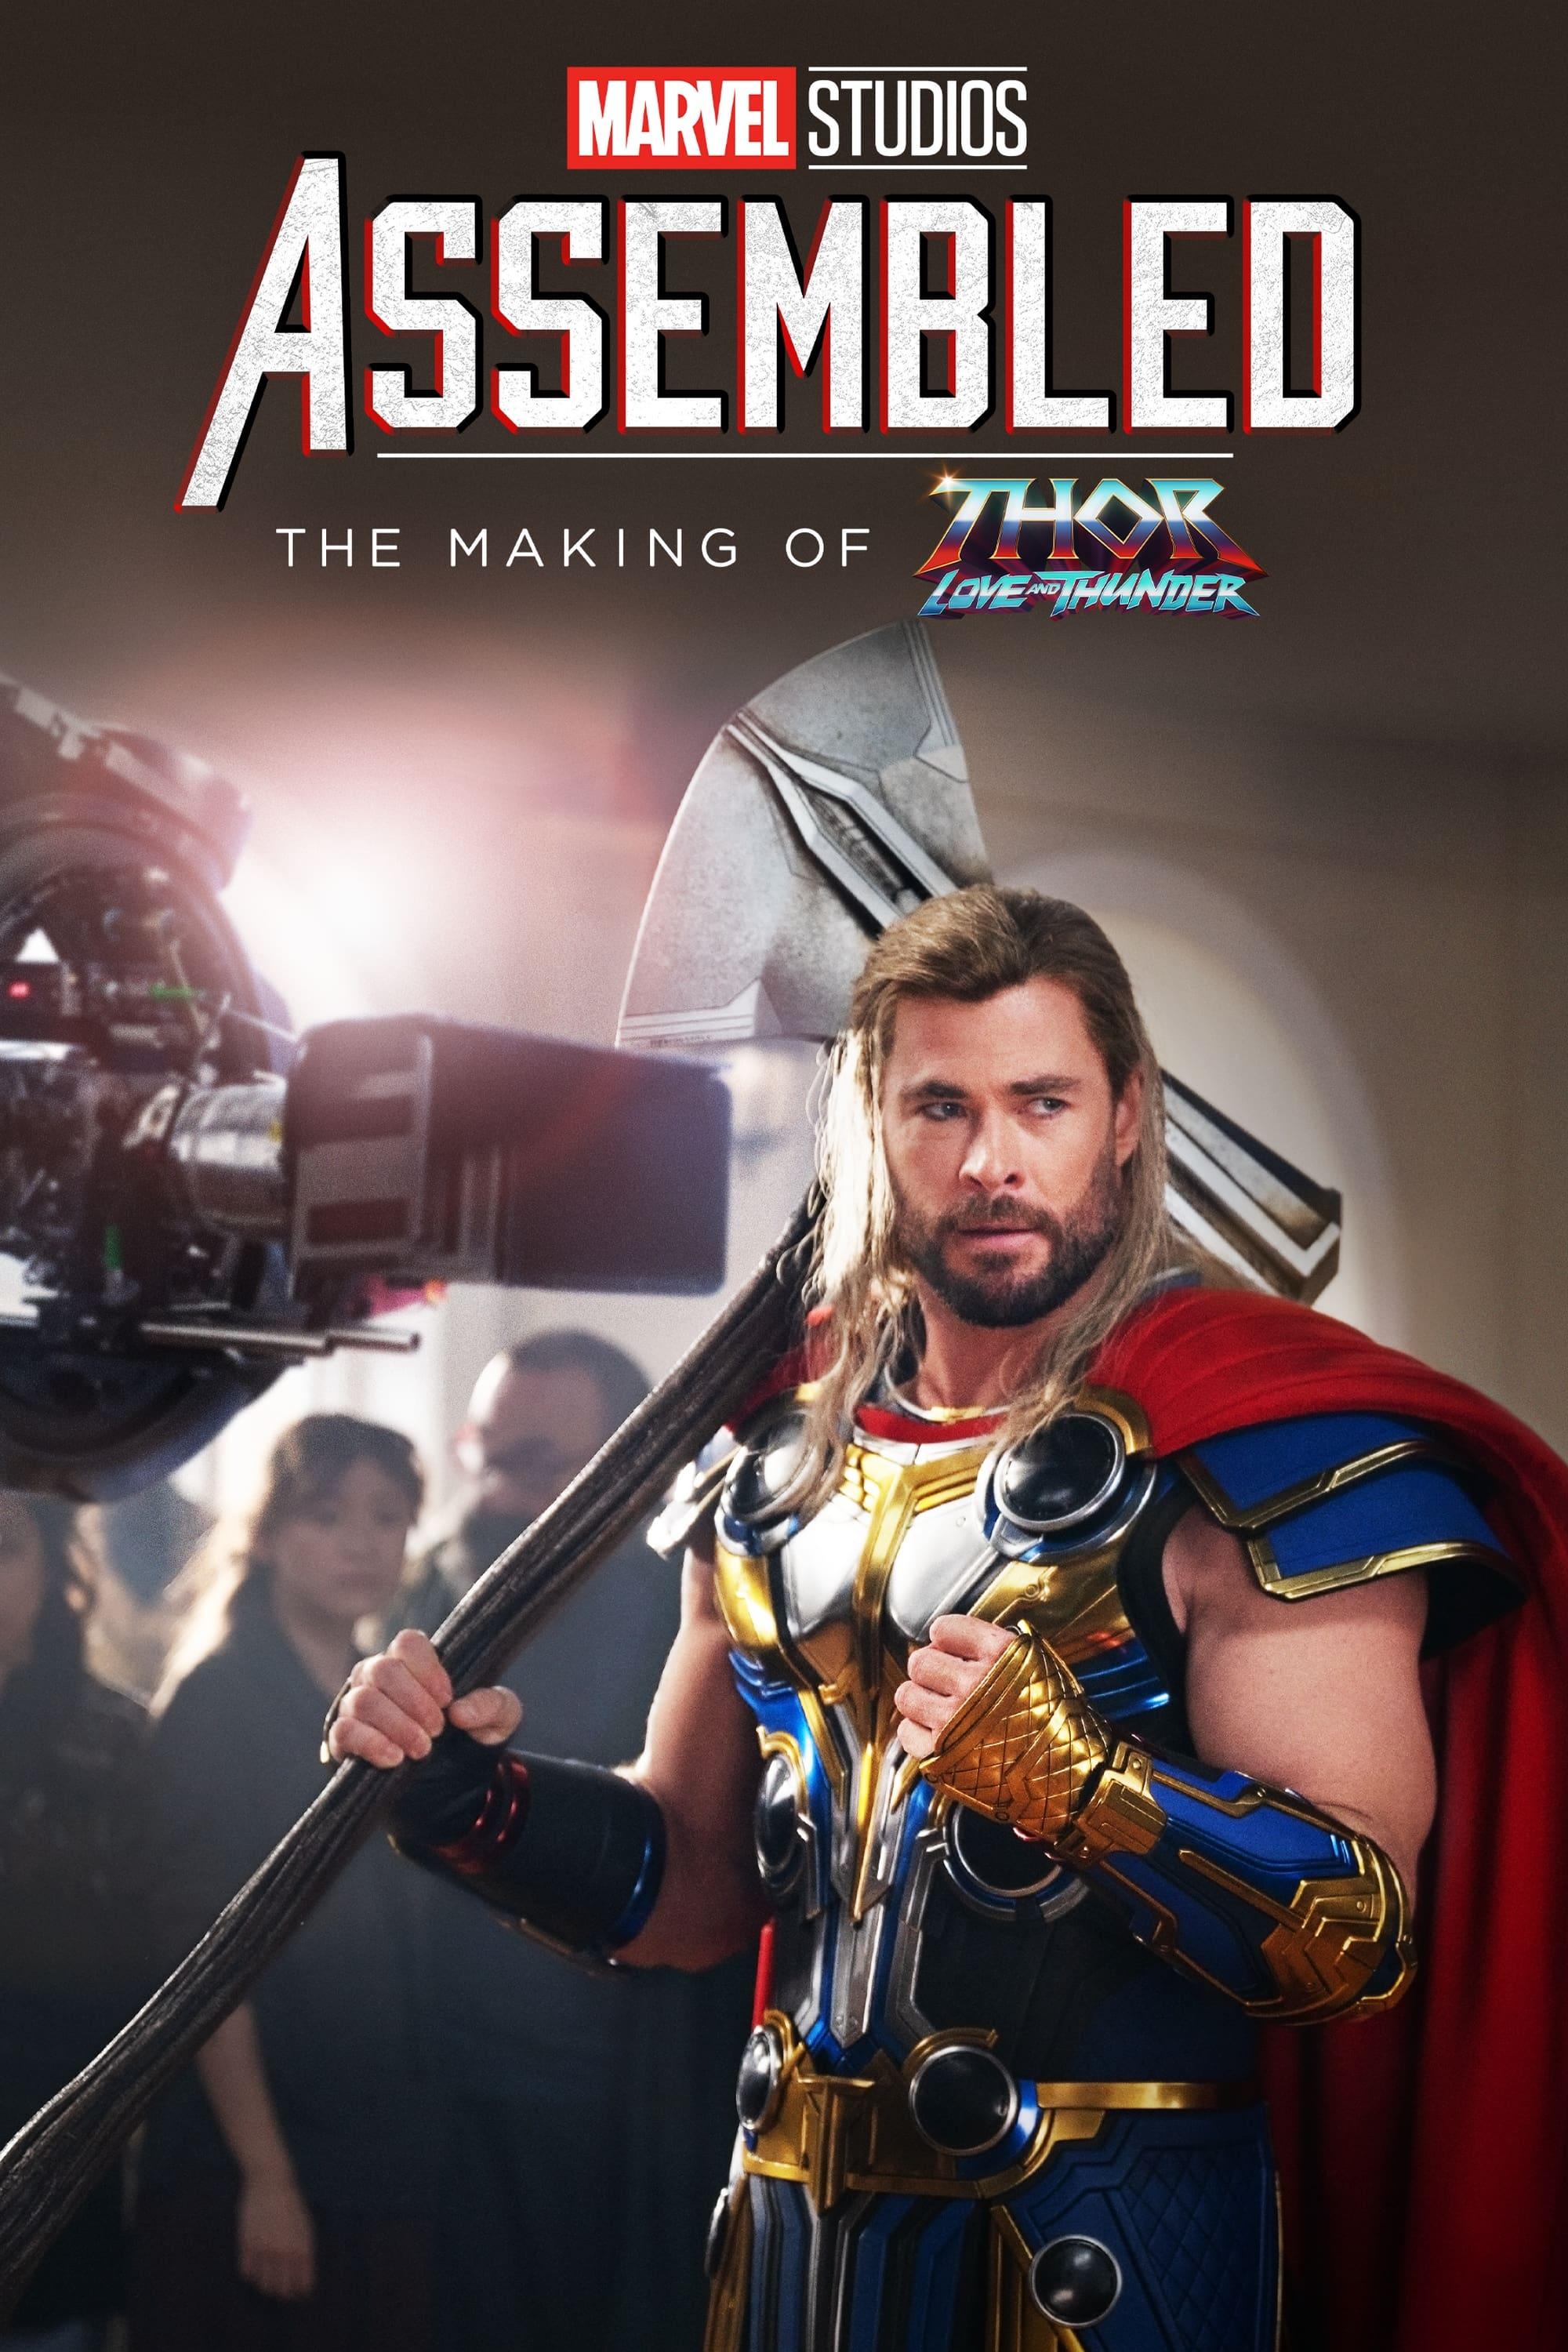 Marvel Studios Assembled: The Making of Thor: Love and Thunder poster